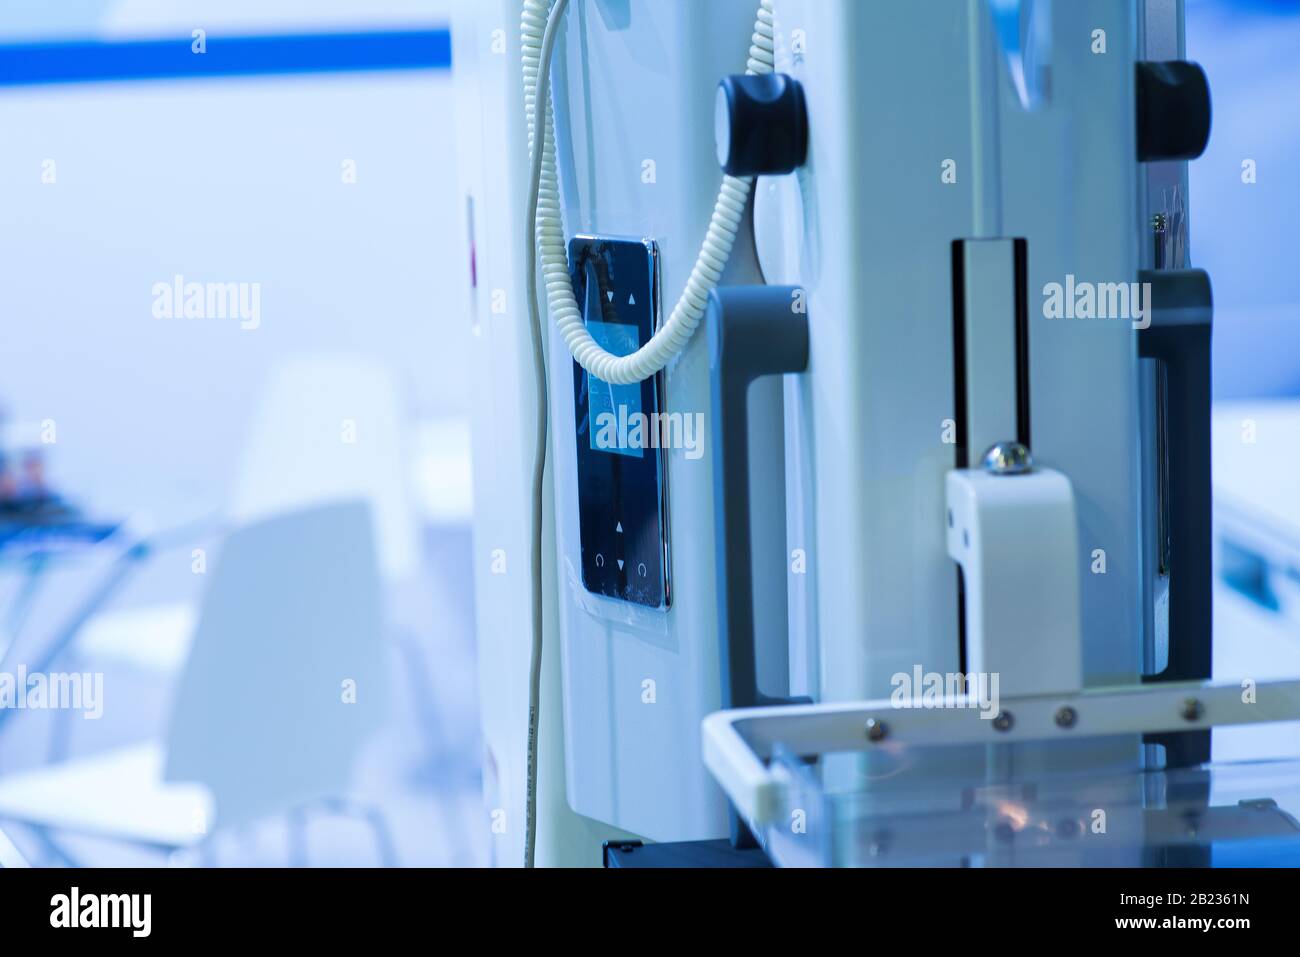 Computed tomography or computed axial tomography scan machine in hospital room. Stock Photo